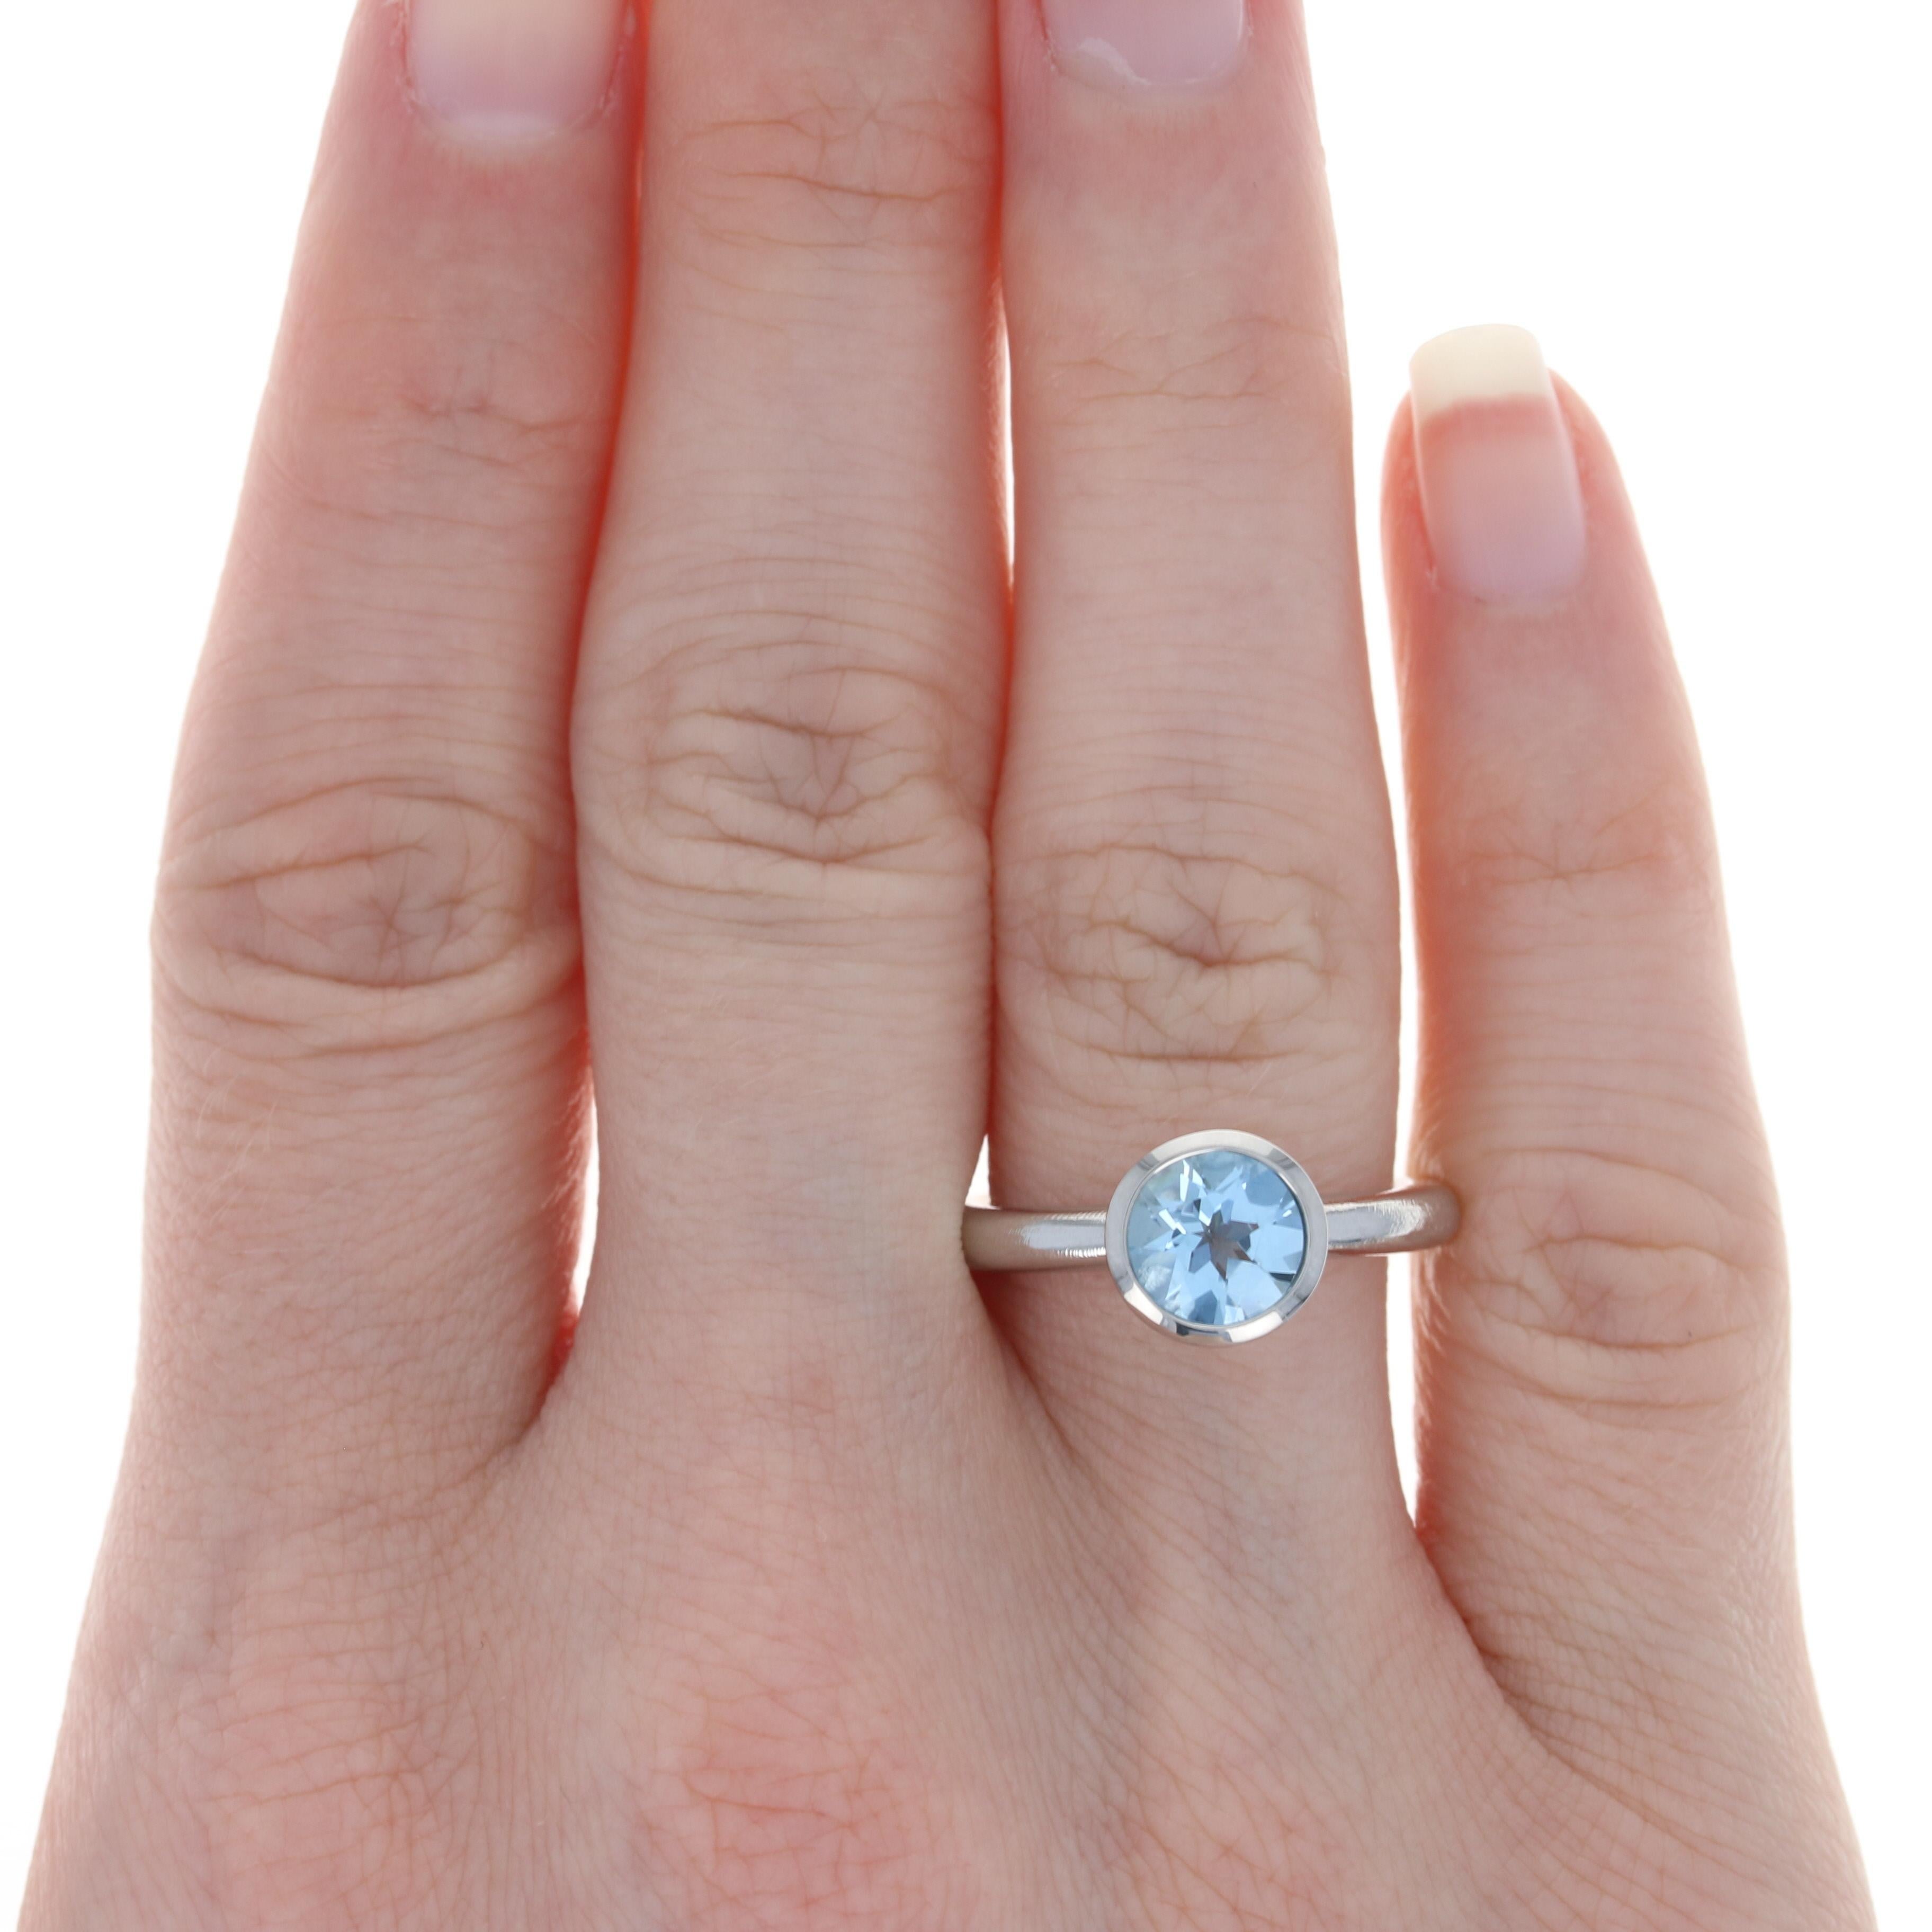 Size: 6 1/2

Metal Content: Palladium

Stone Information: 
Genuine Aquamarine
Treatment: Heating
Carat: 1.90ct
Cut: Round
Color: Blue 

Style: Solitaire
Features: Brushed & Smooth Finishes

Face Height (north to south): 11/32